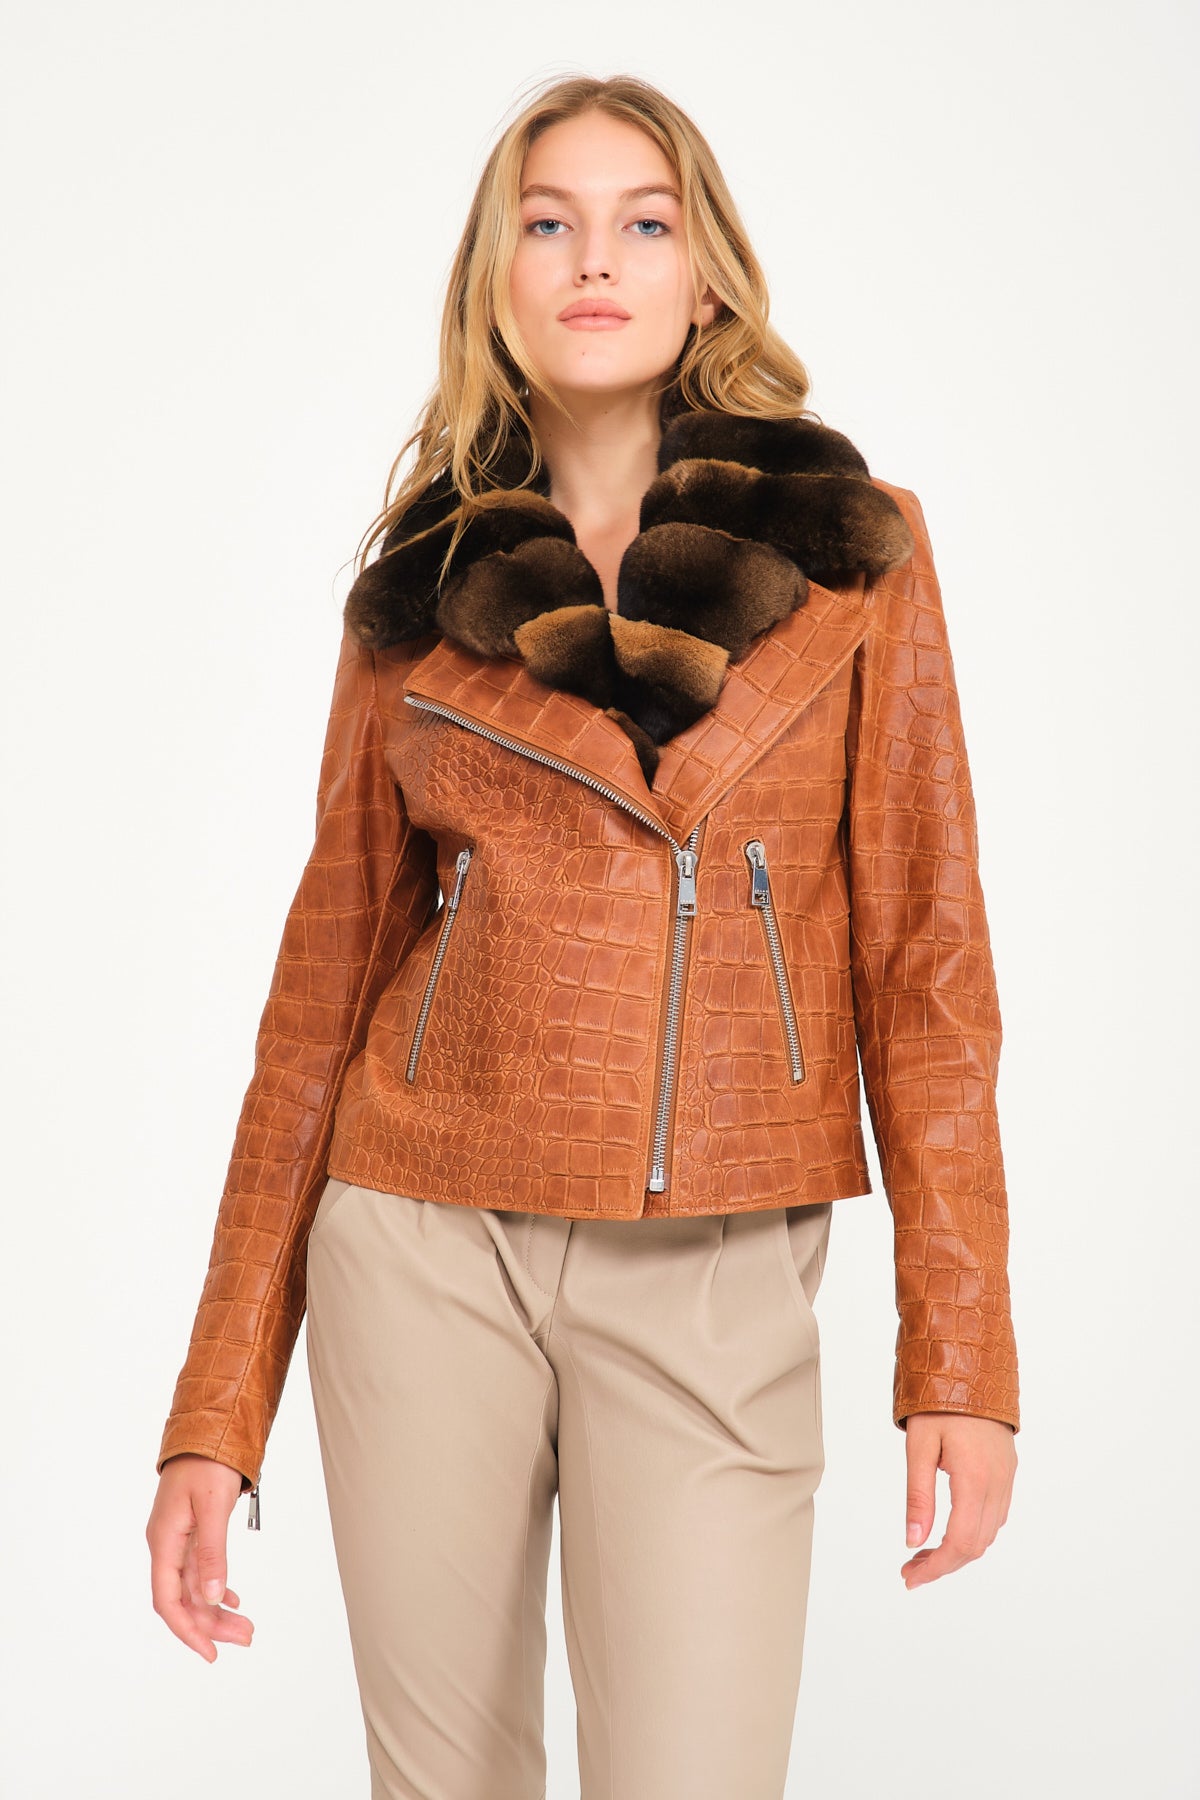 Long-lasting, Durable Women's Leather Jacket Models are on